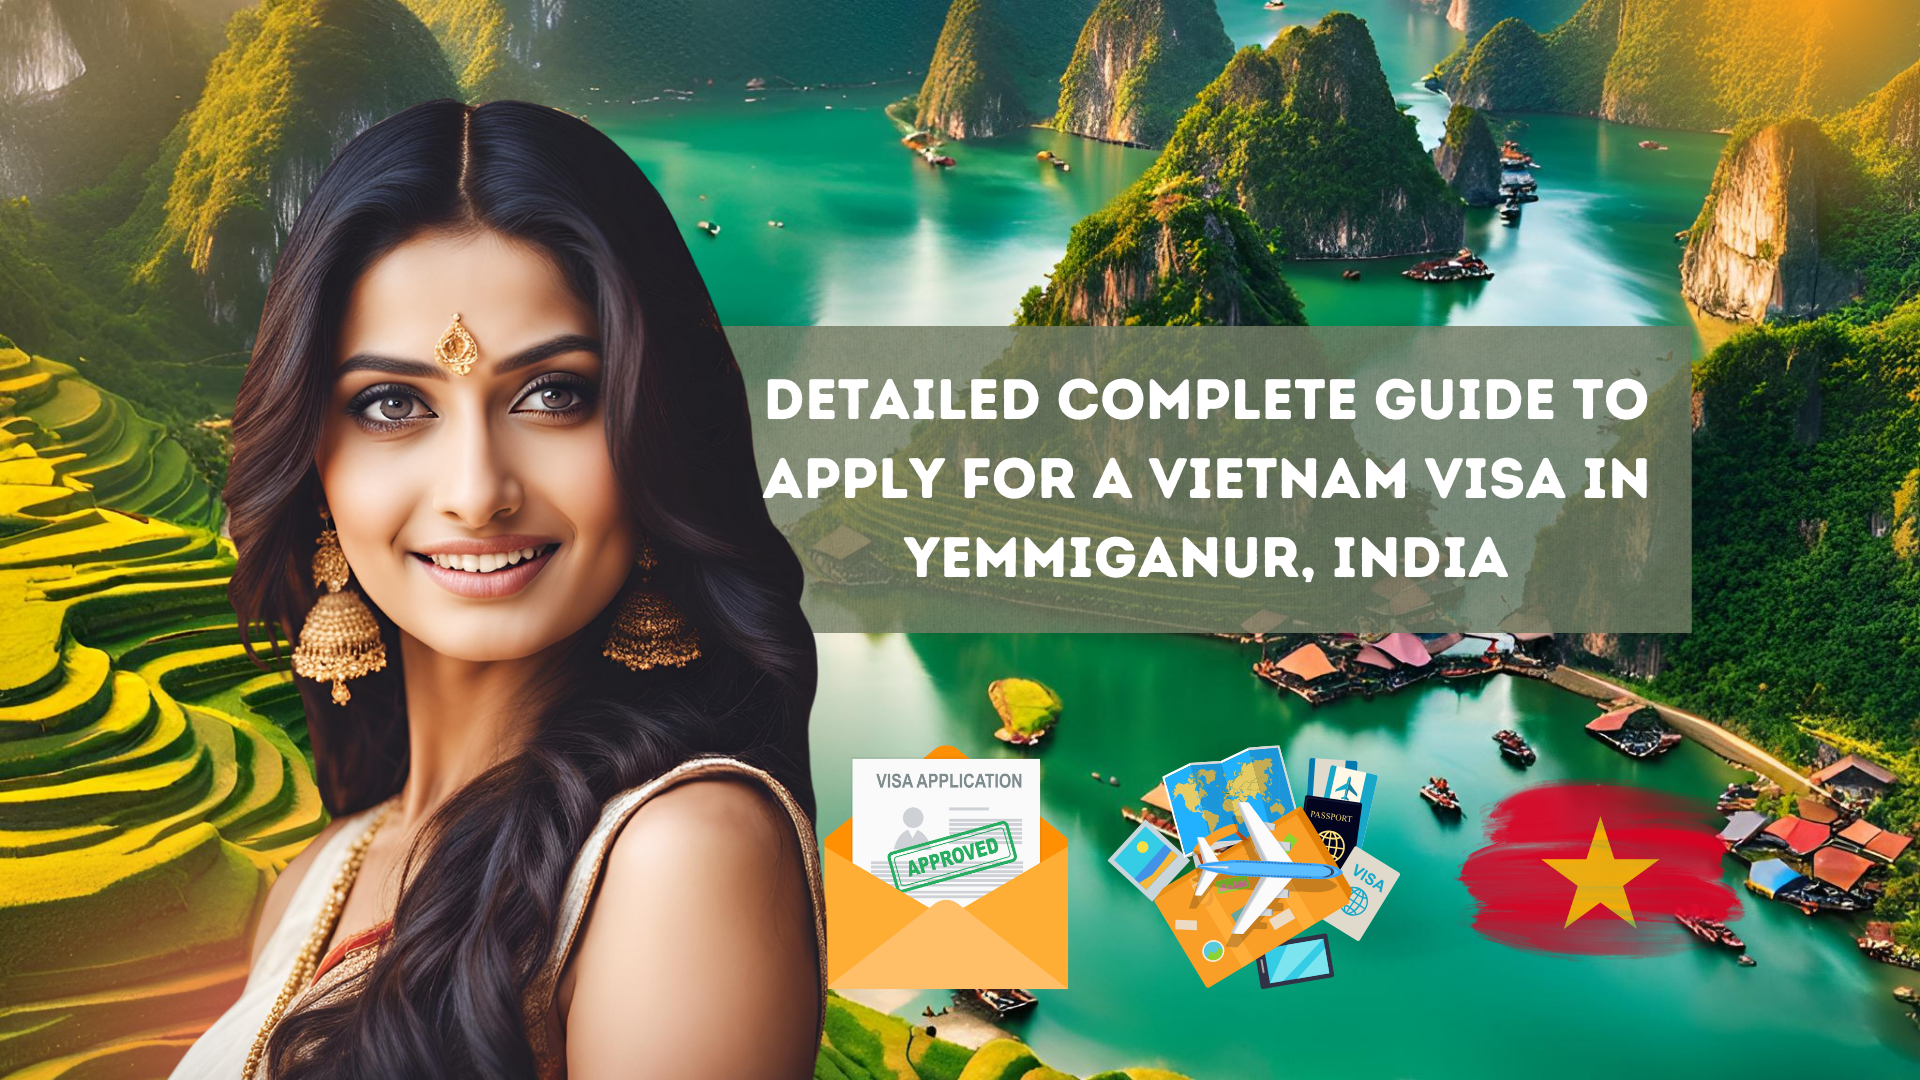 Detailed Complete Guide to Apply for a Vietnam Visa in Yemmiganur, India